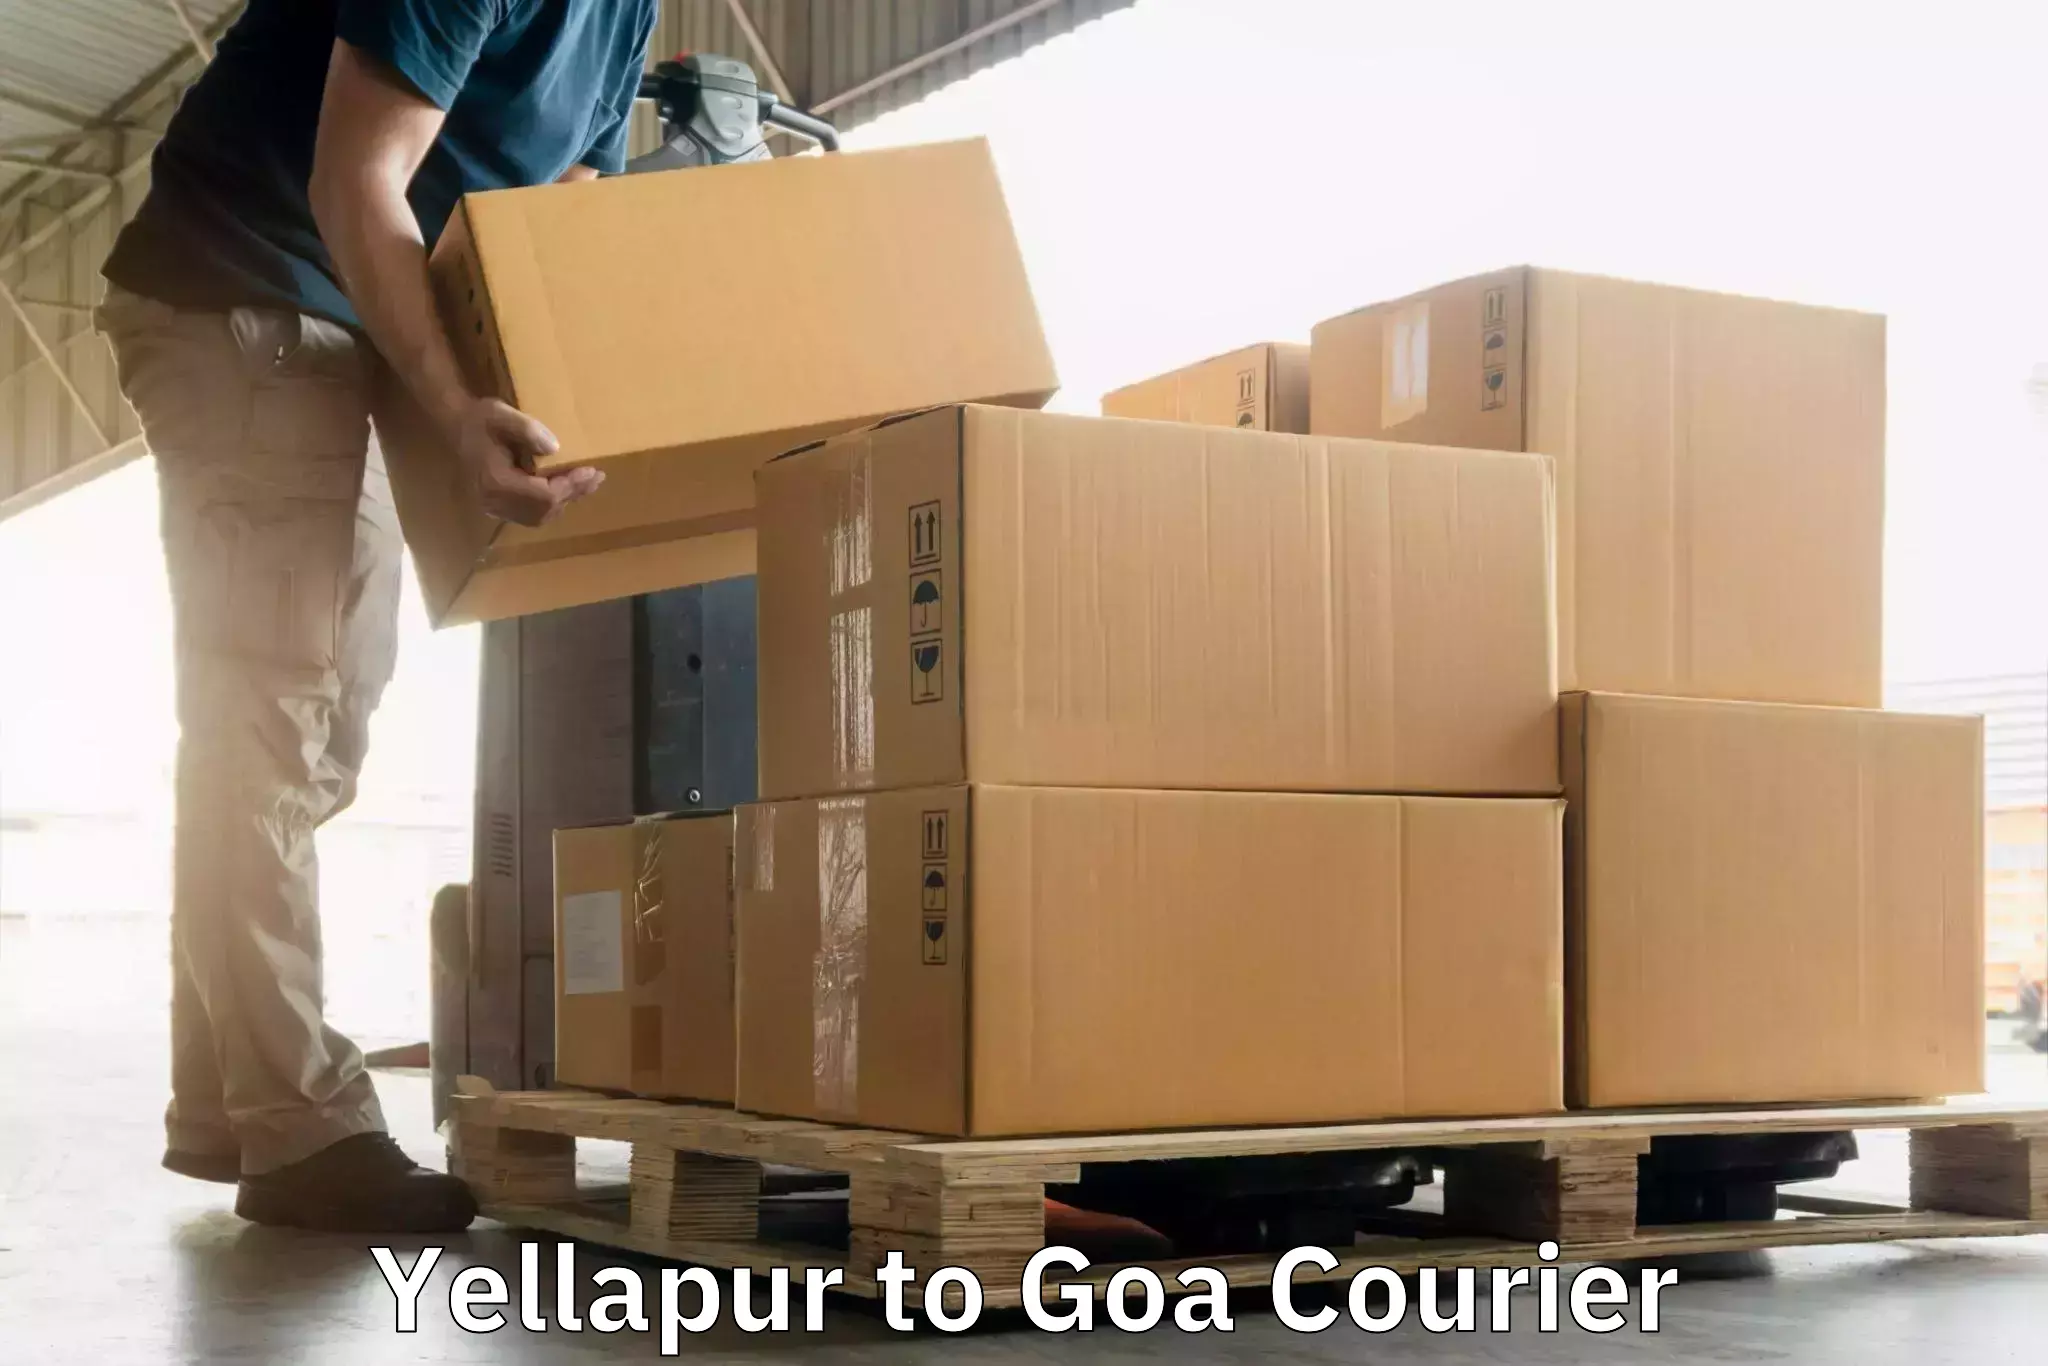 Courier service comparison in Yellapur to Margao